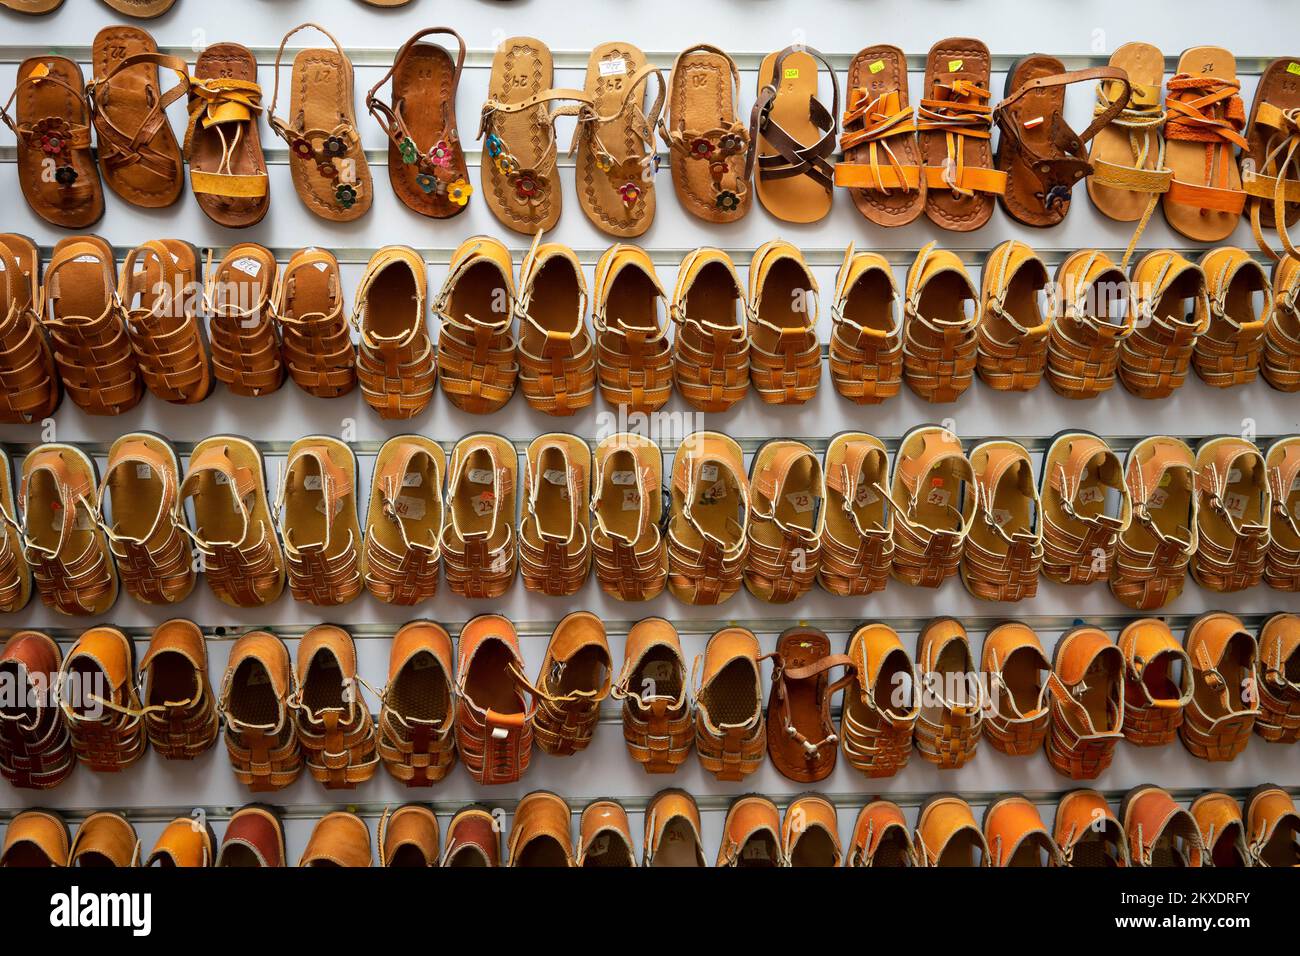 Wall of leather sandals in a craft store in Jinotega, Nicaragua Stock Photo